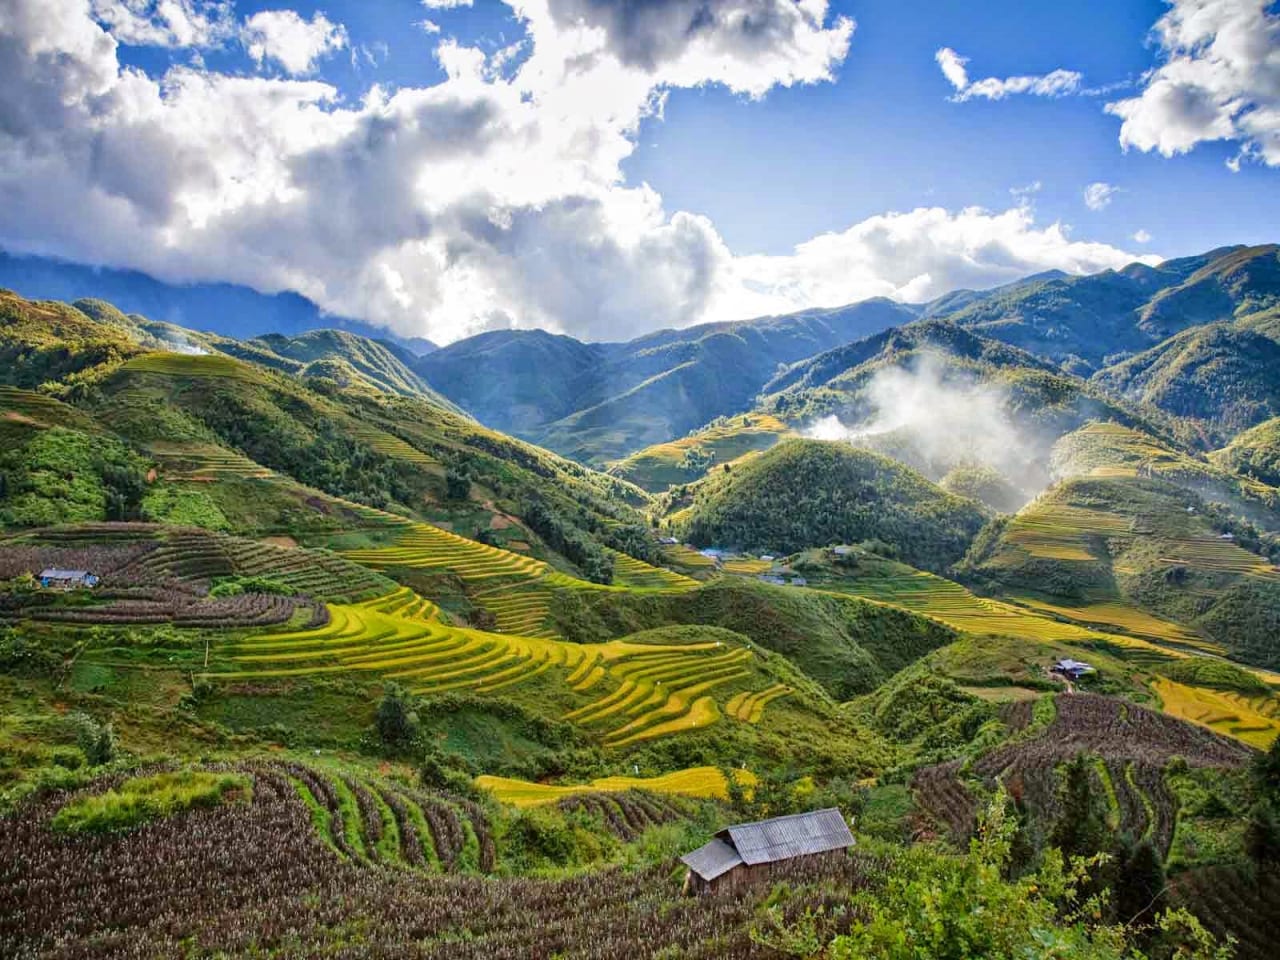 Day Trips from Hanoi Explore the Best of Northern Vietnam